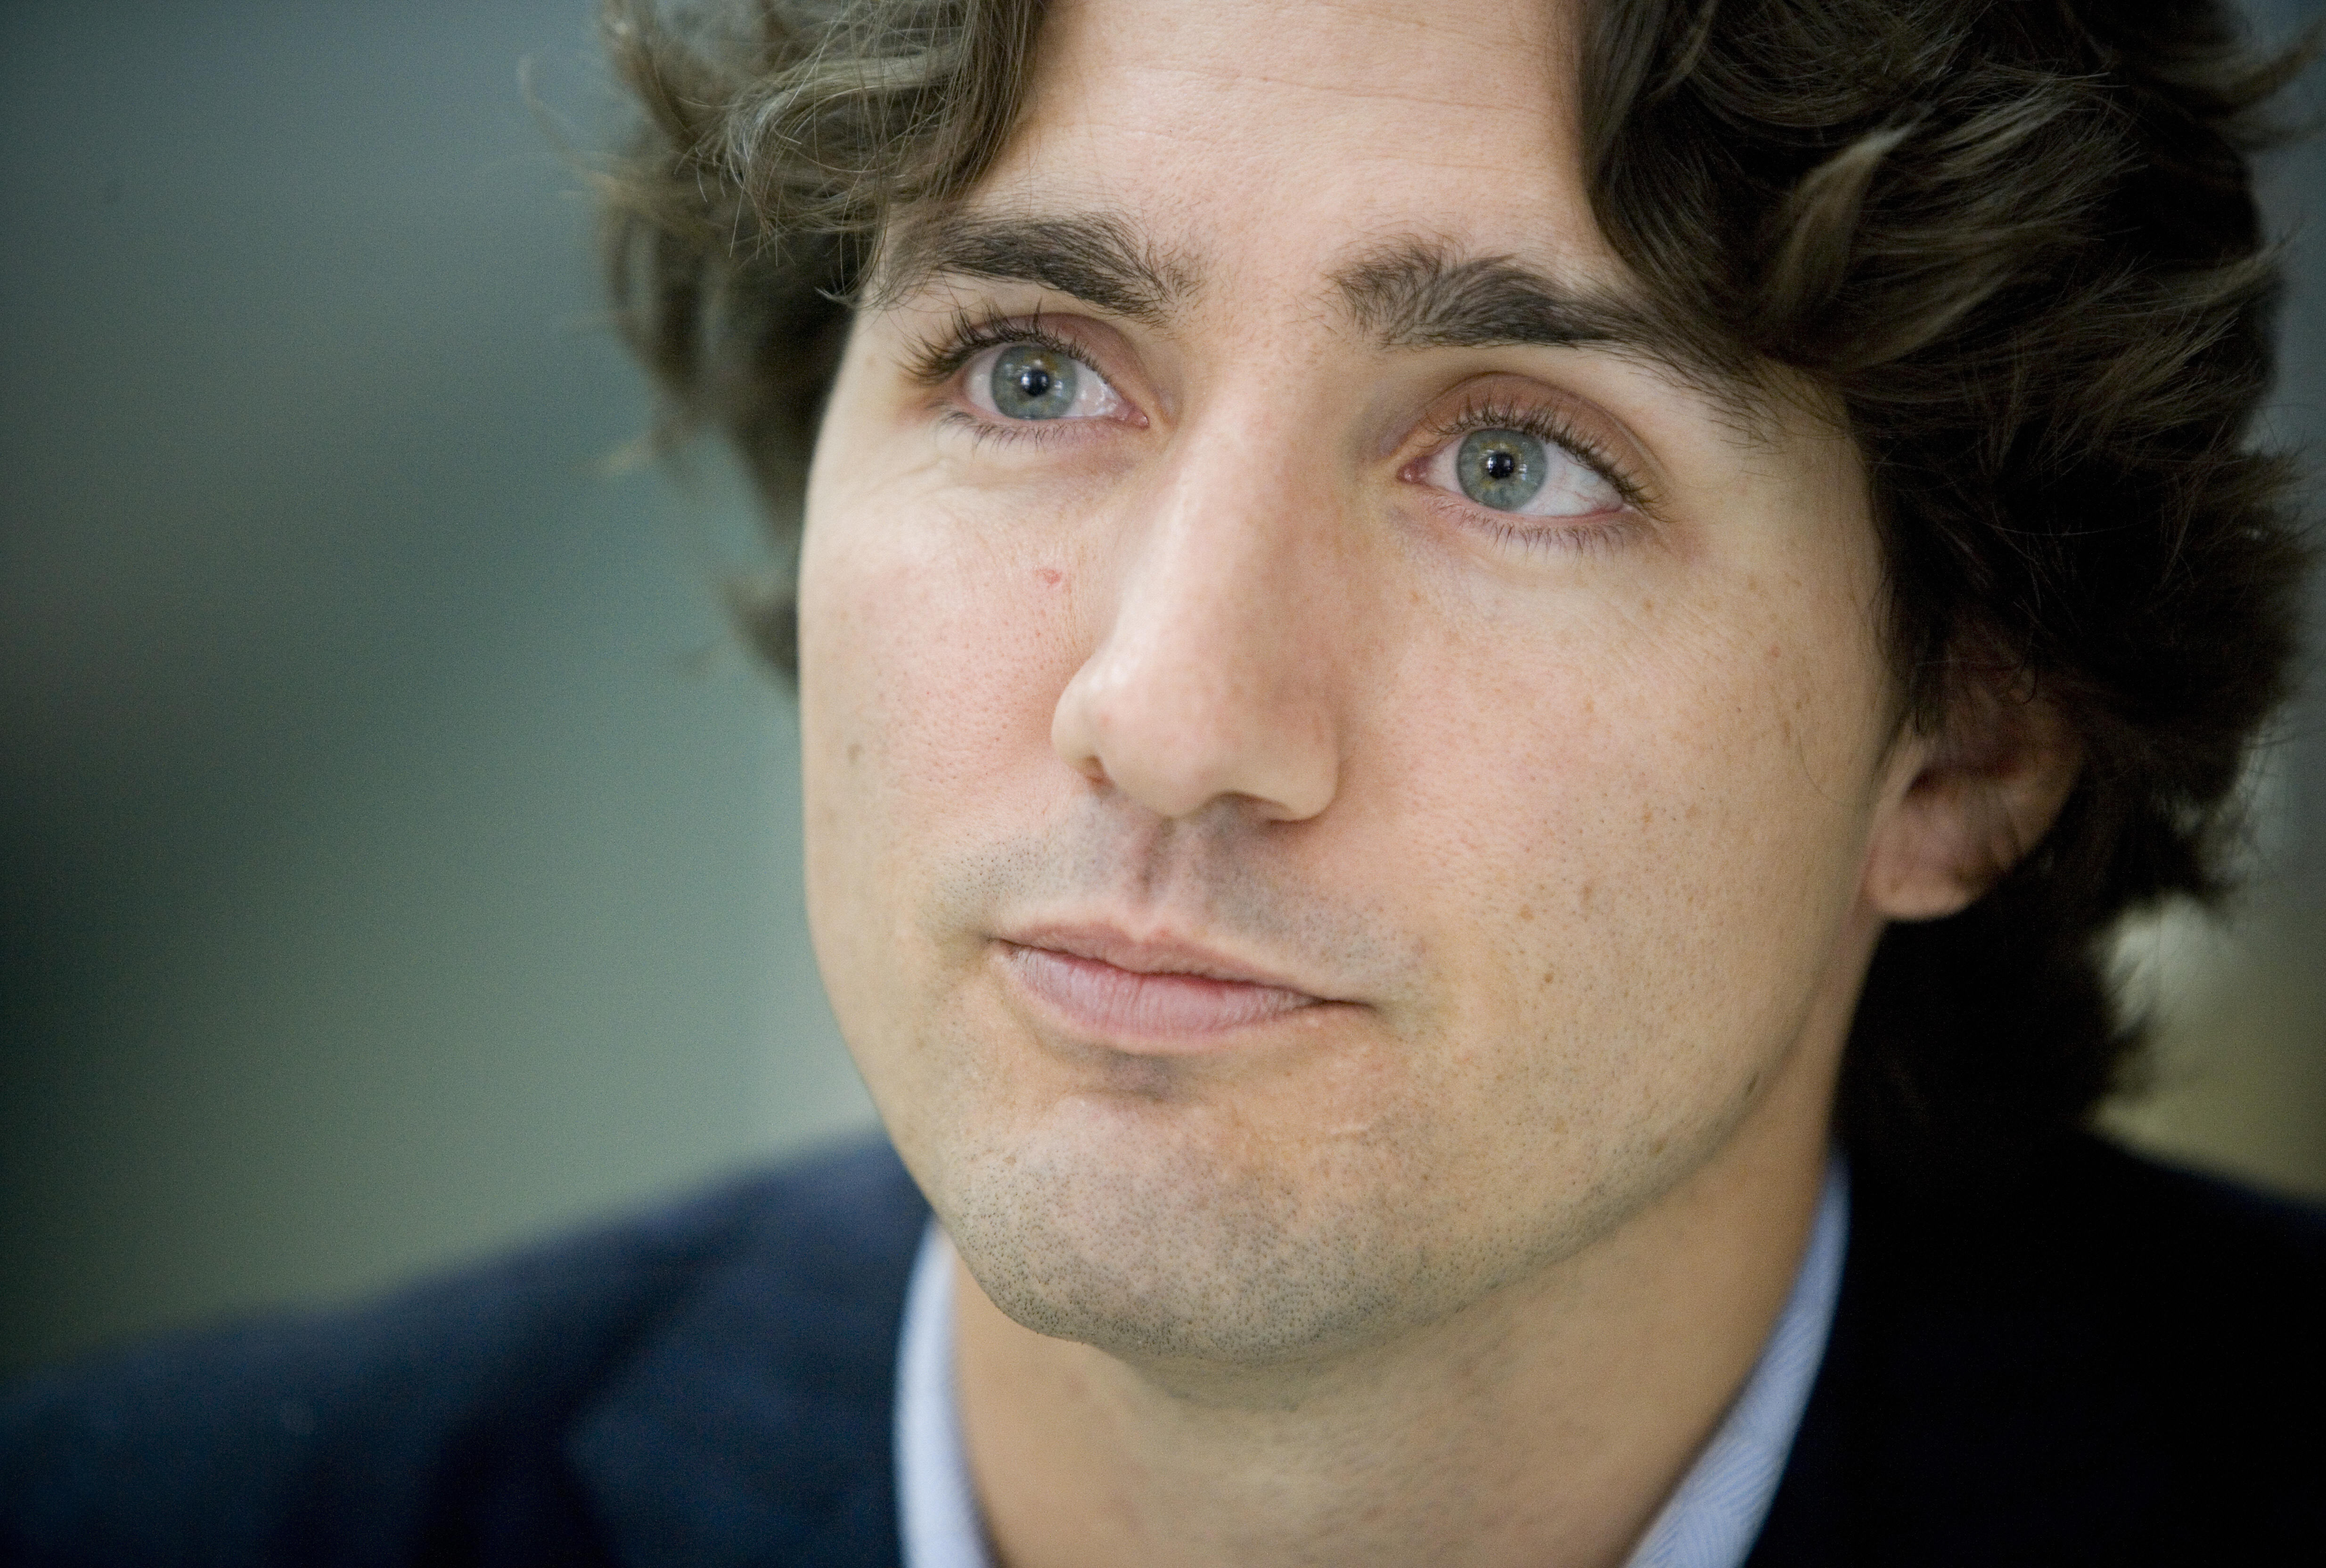 Canadian Prime Minister Justin Trudeau's Life in Pictures | Time